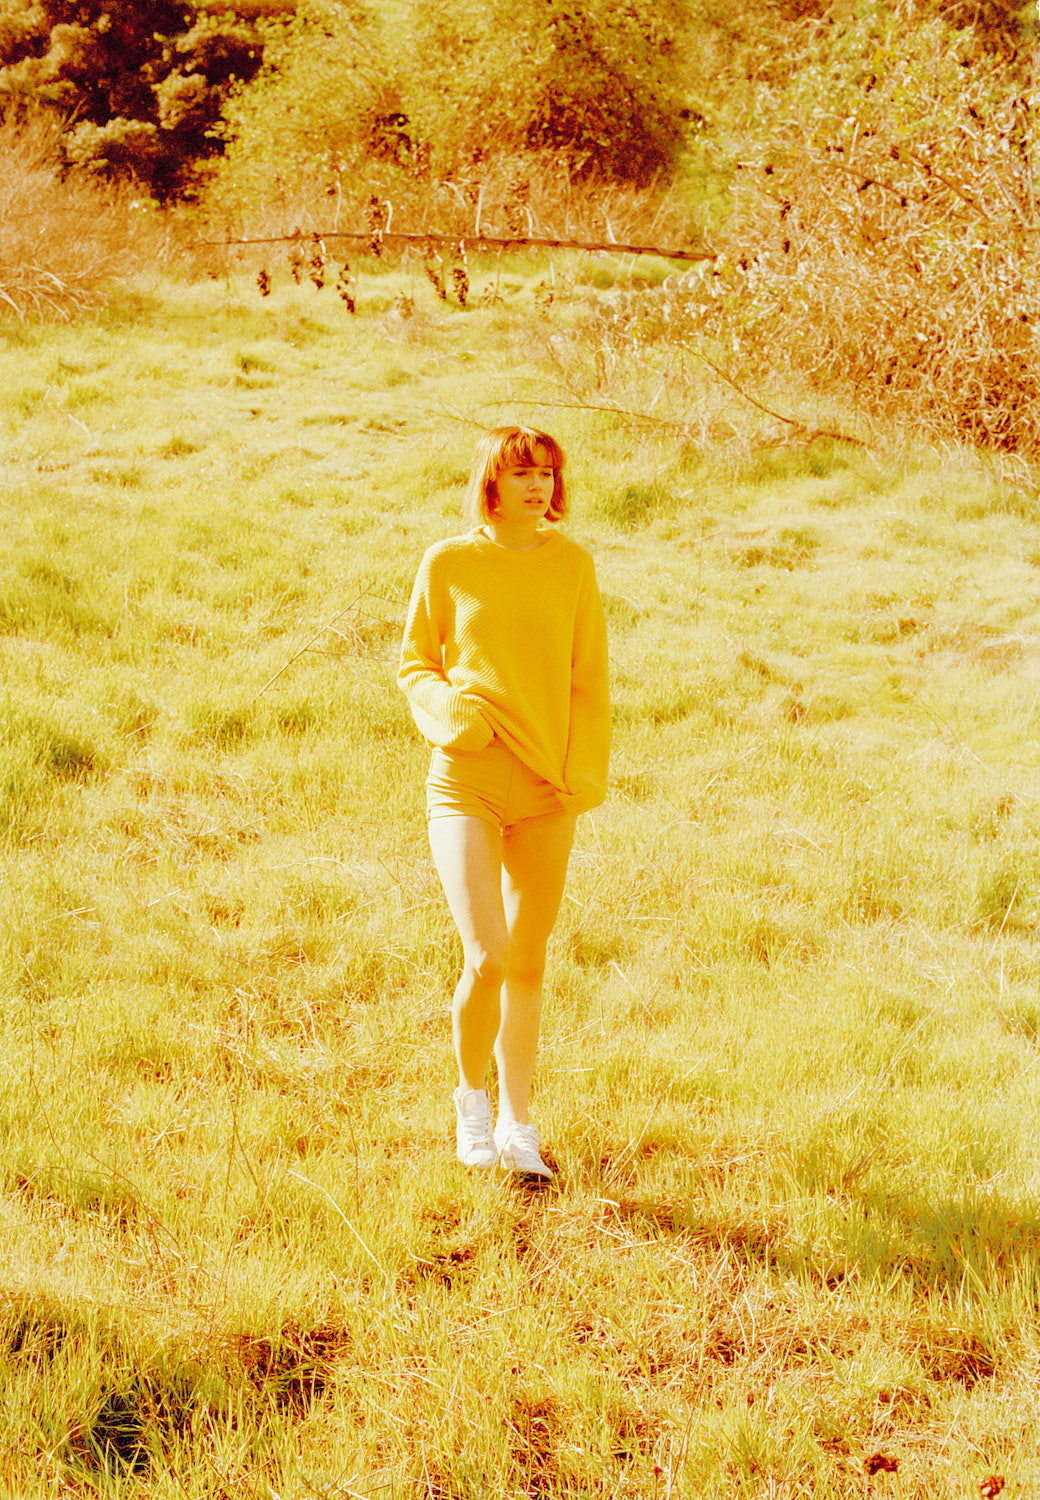 Nikki standing middle of the grass field wearing yellow outfit